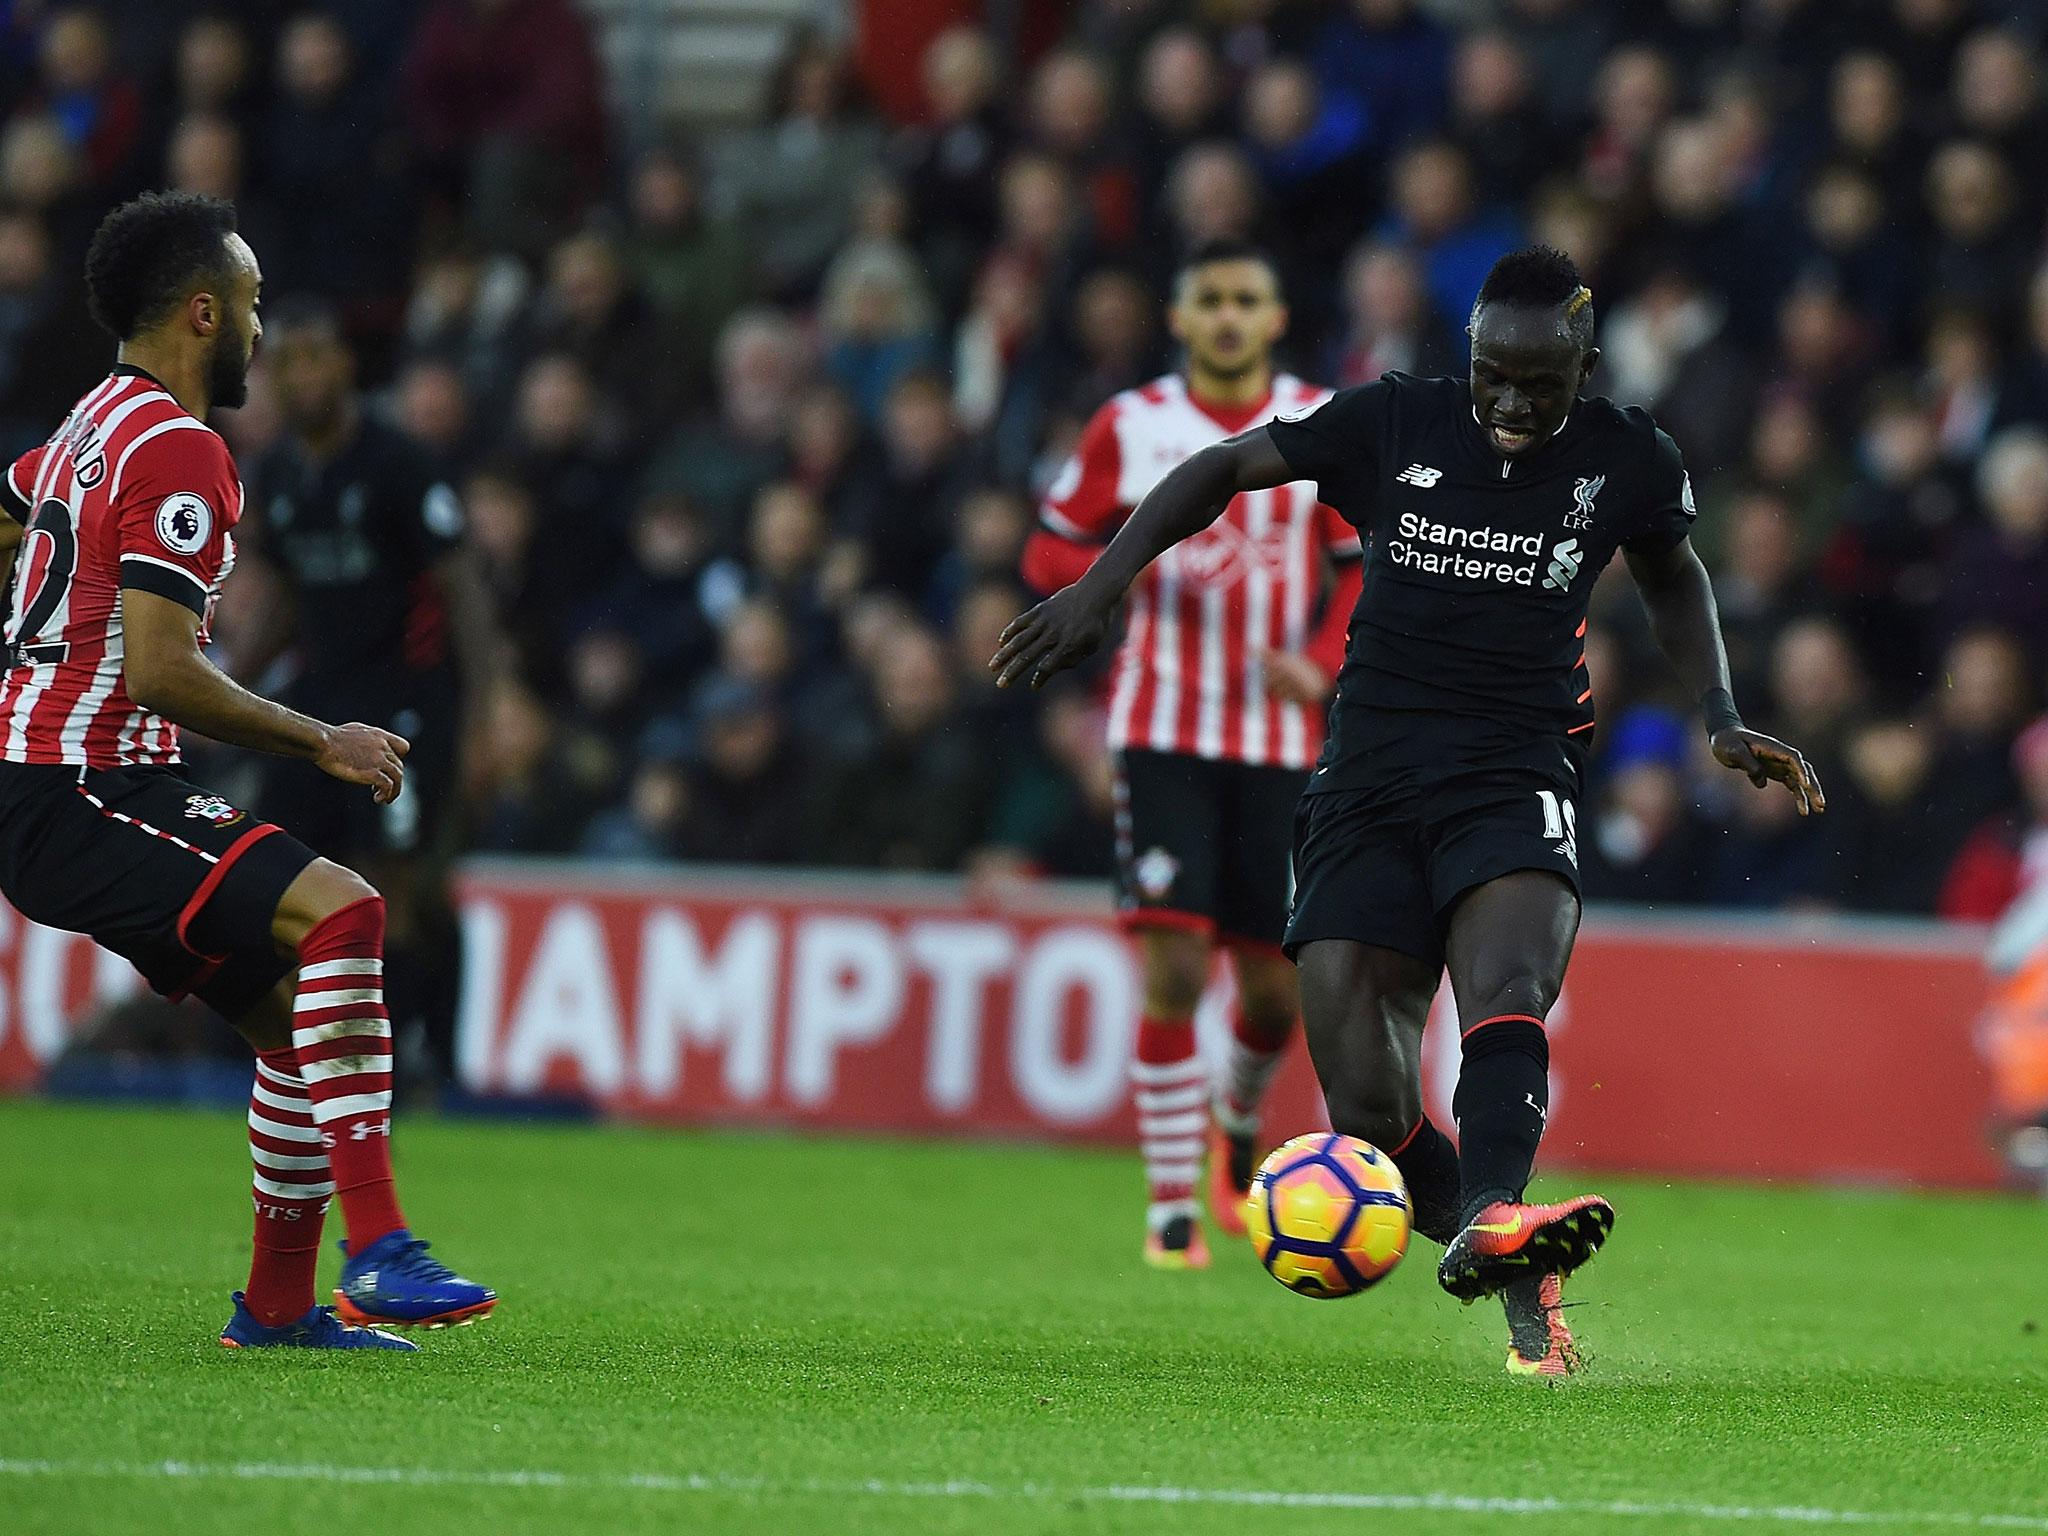 Mane couldn't lead Liverpool to victory over his former side on the south coast